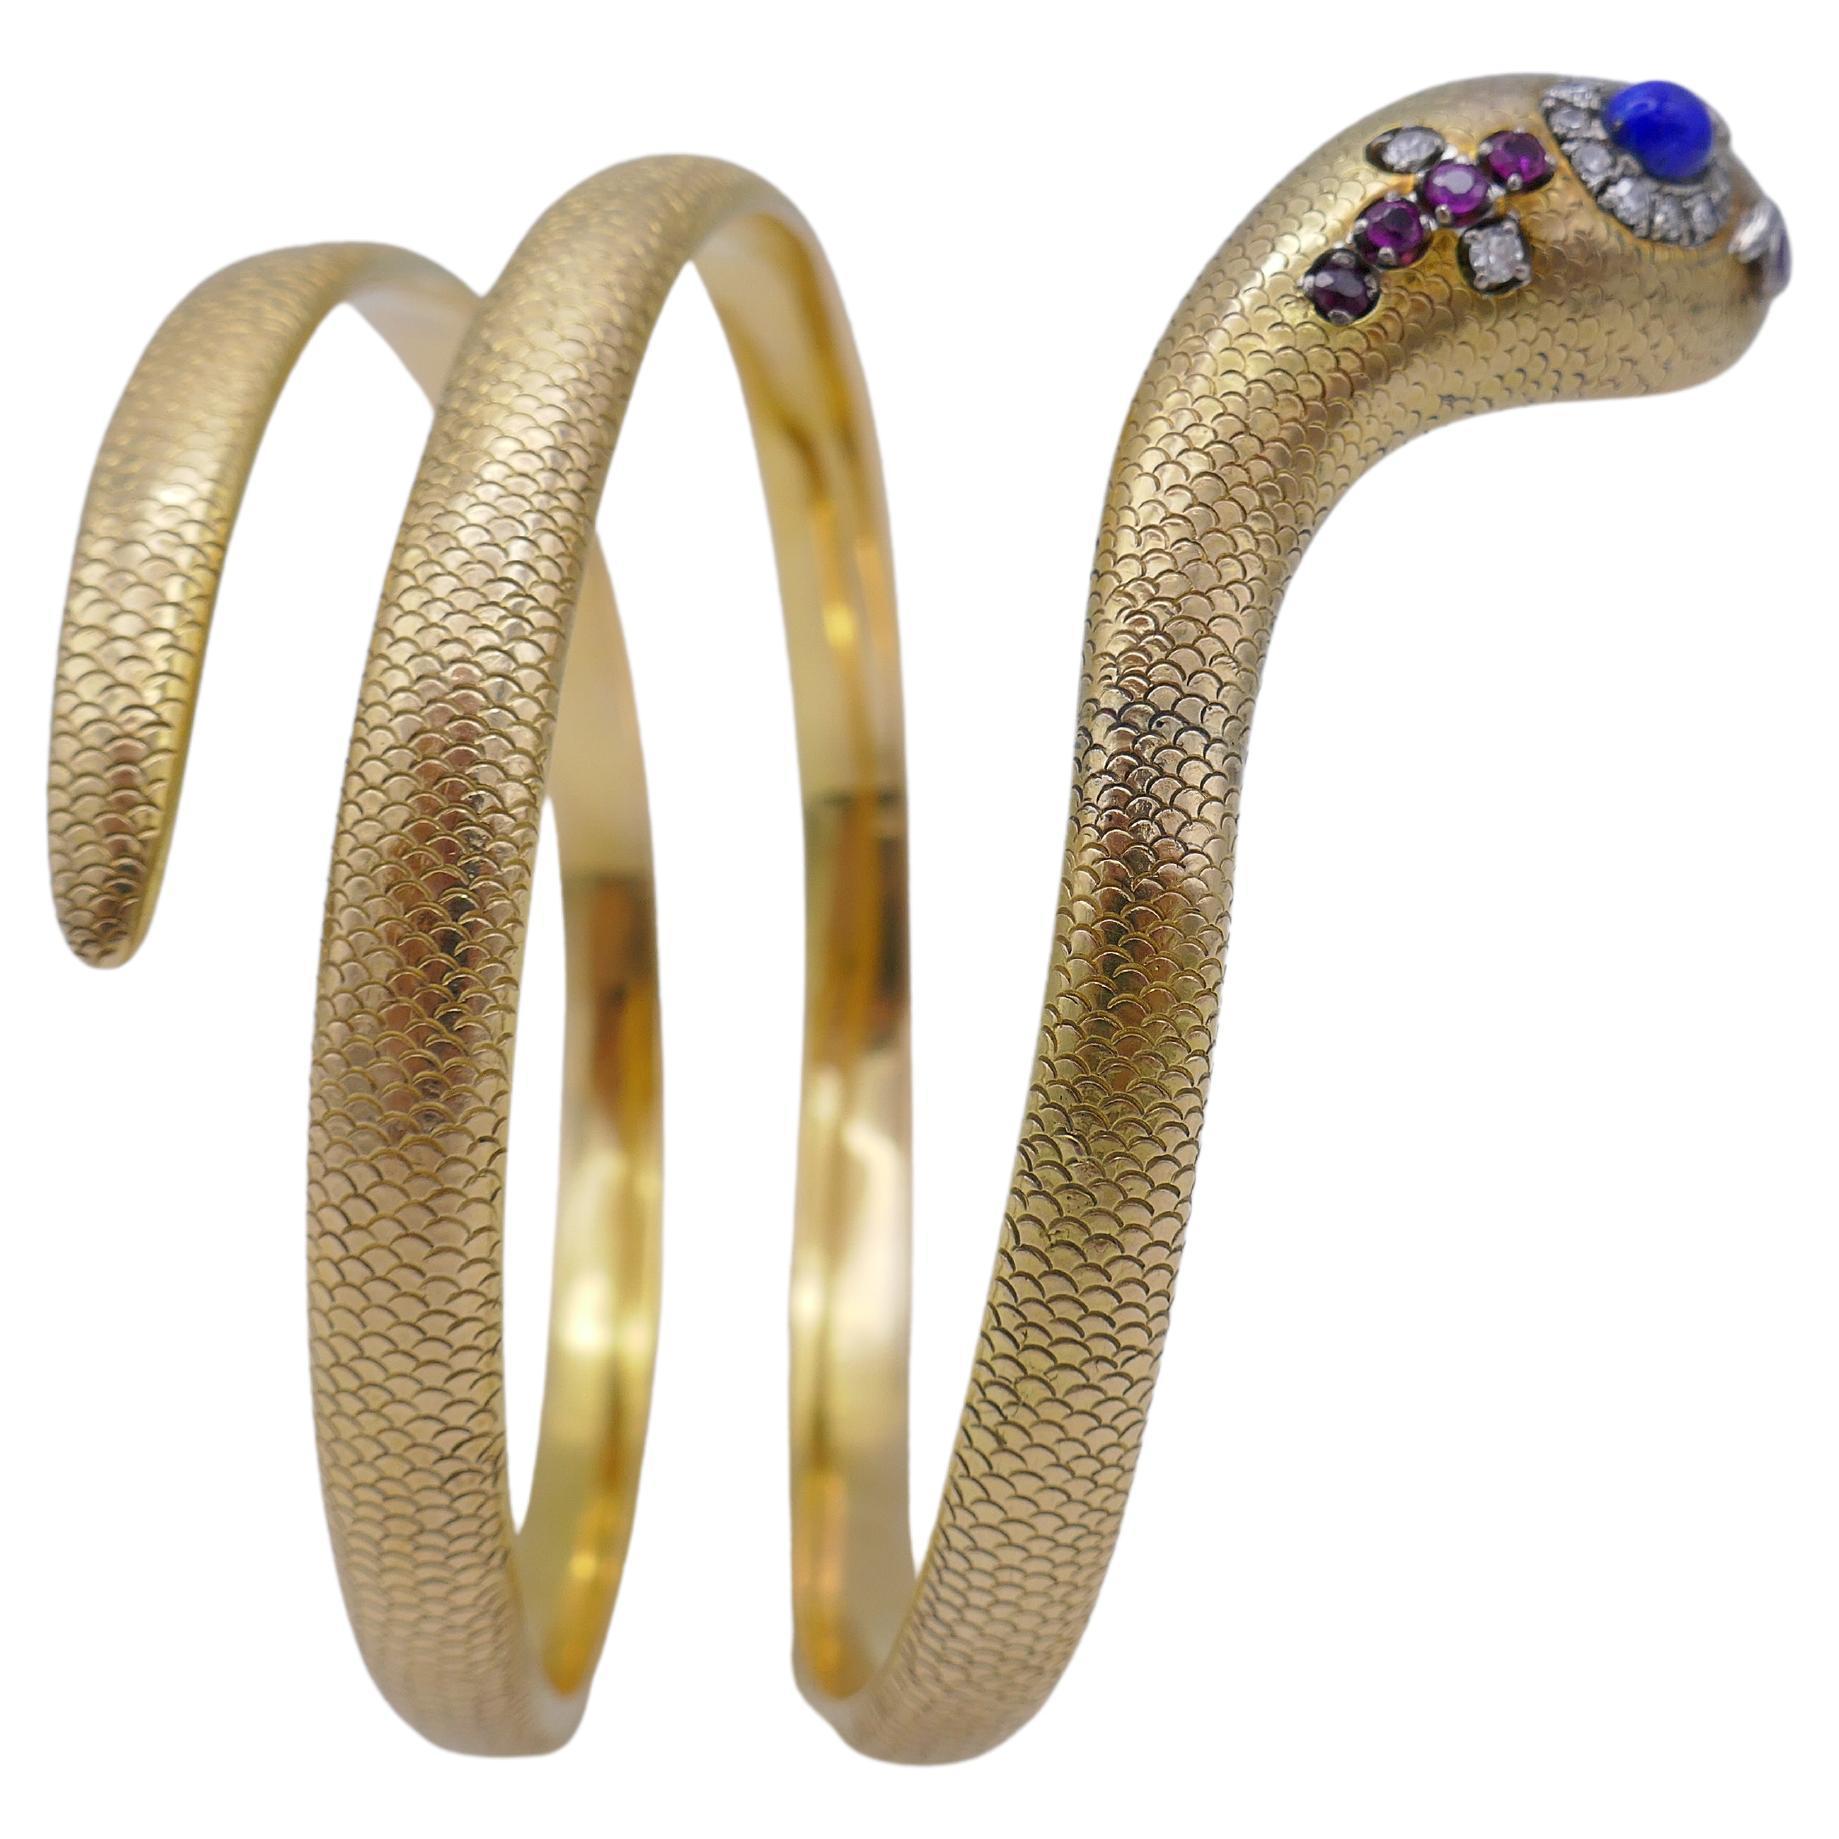 An exquisite snake bracelet, made of gold, featuring gemstones.
The bracelet is designed as a rising snake, with the head decorated by the lapis, diamond, ruby and emerald. The 